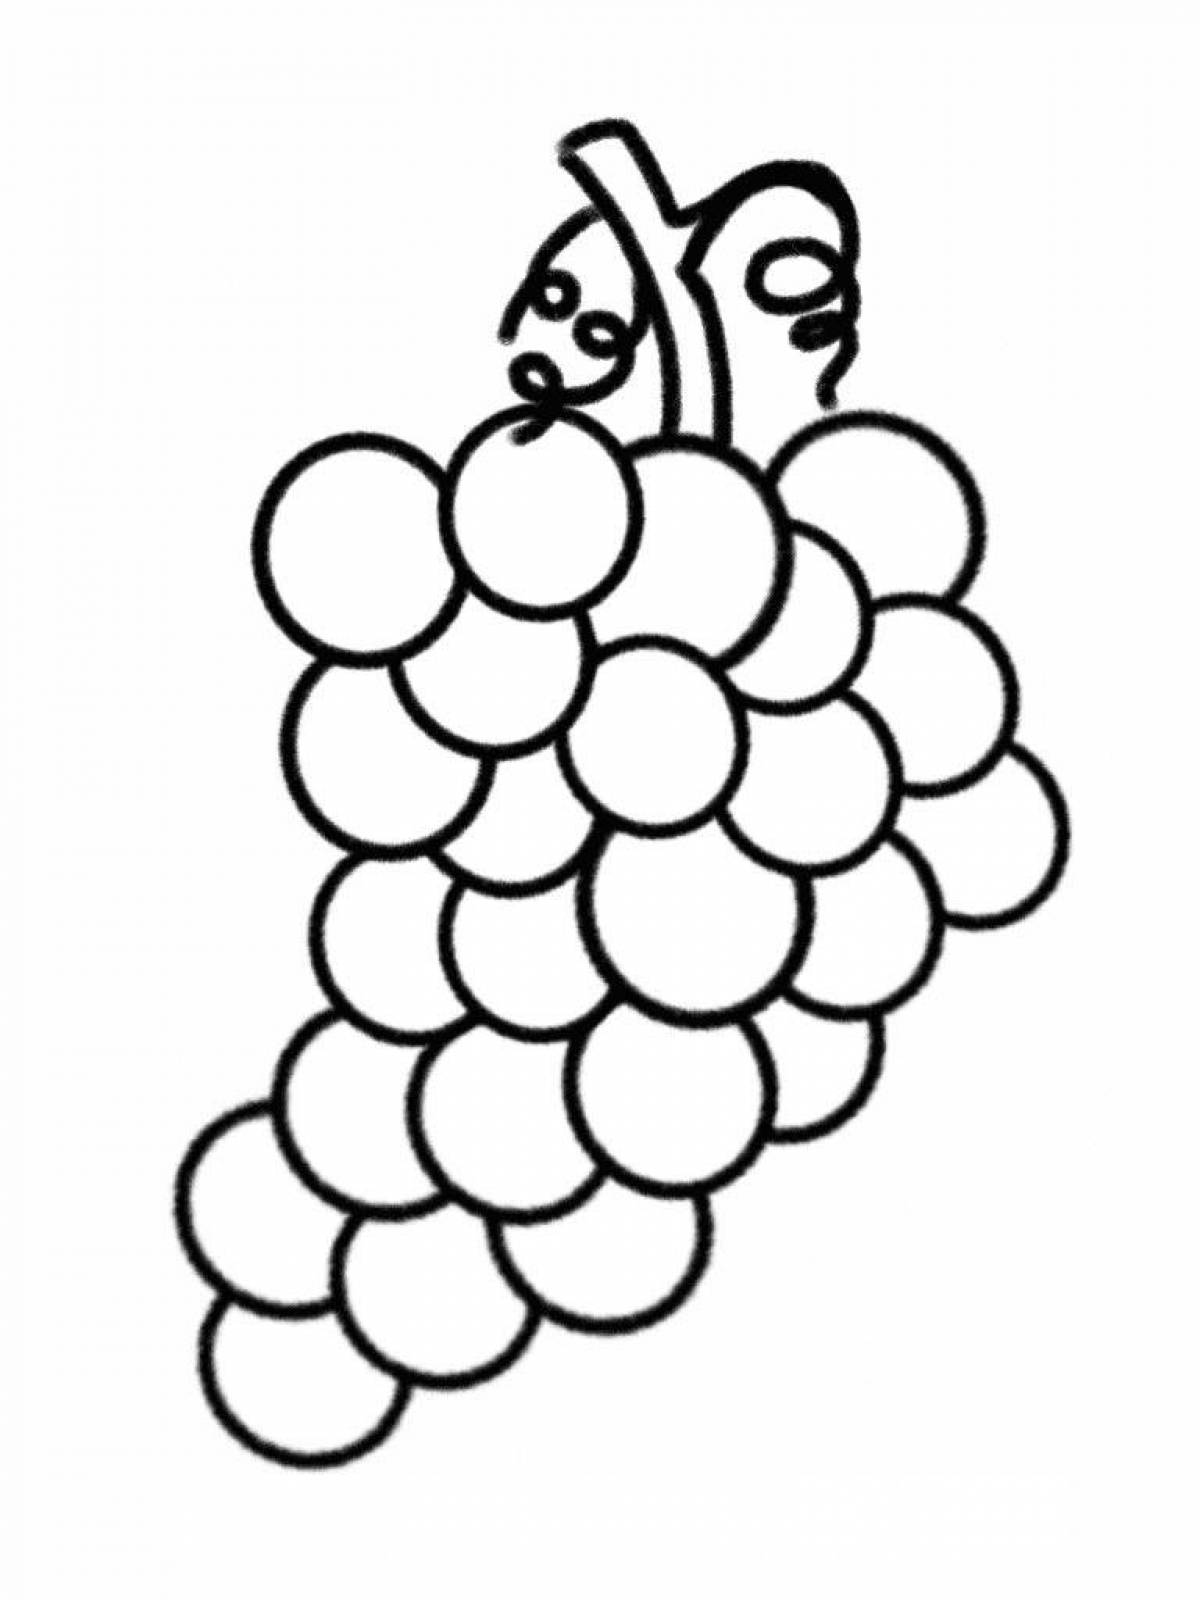 Grand grape coloring pages for kids